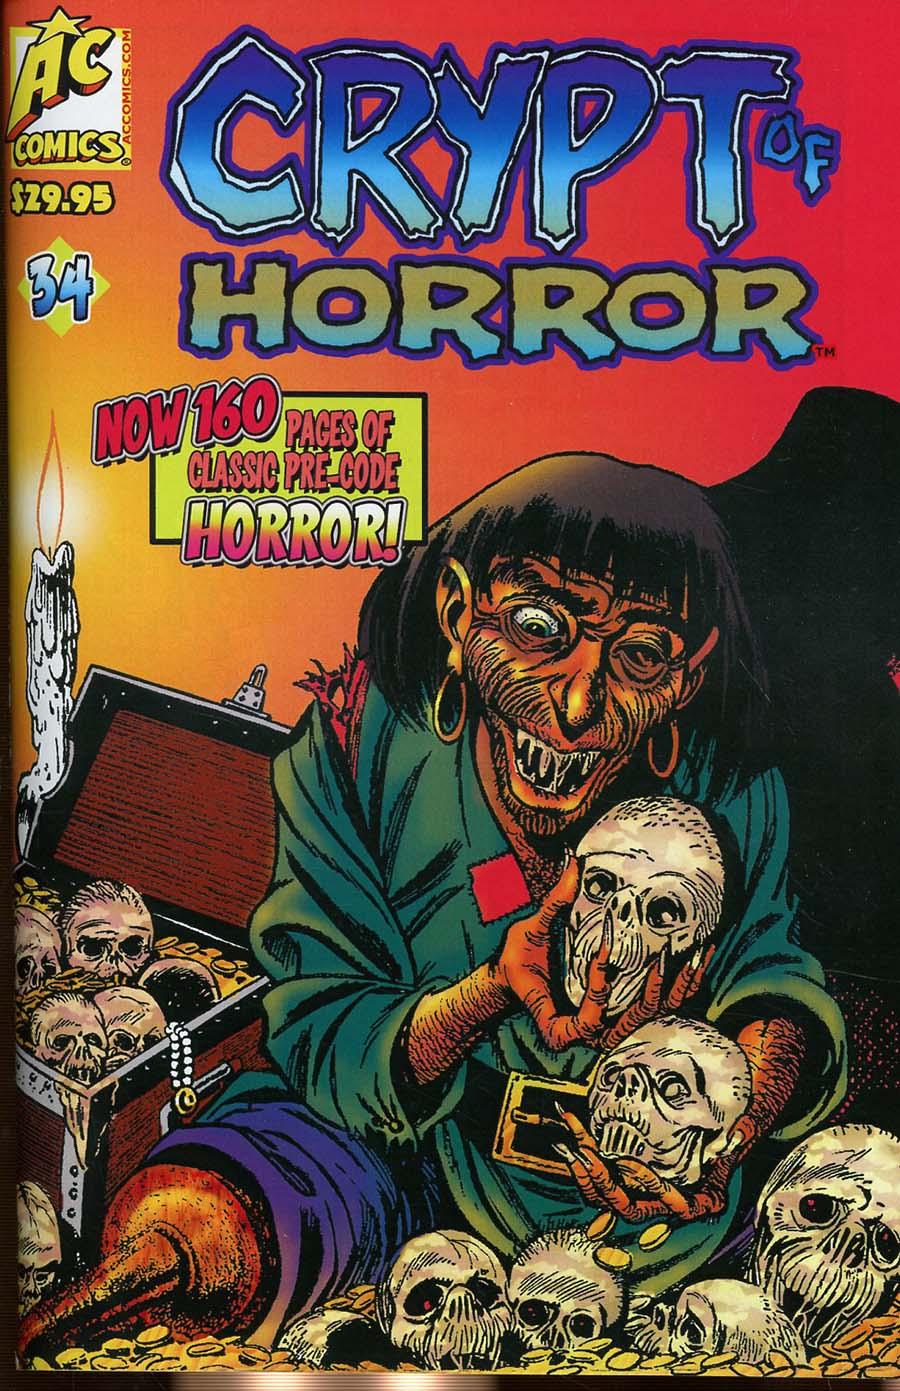 Crypt Of Horror Vol. 1 #34